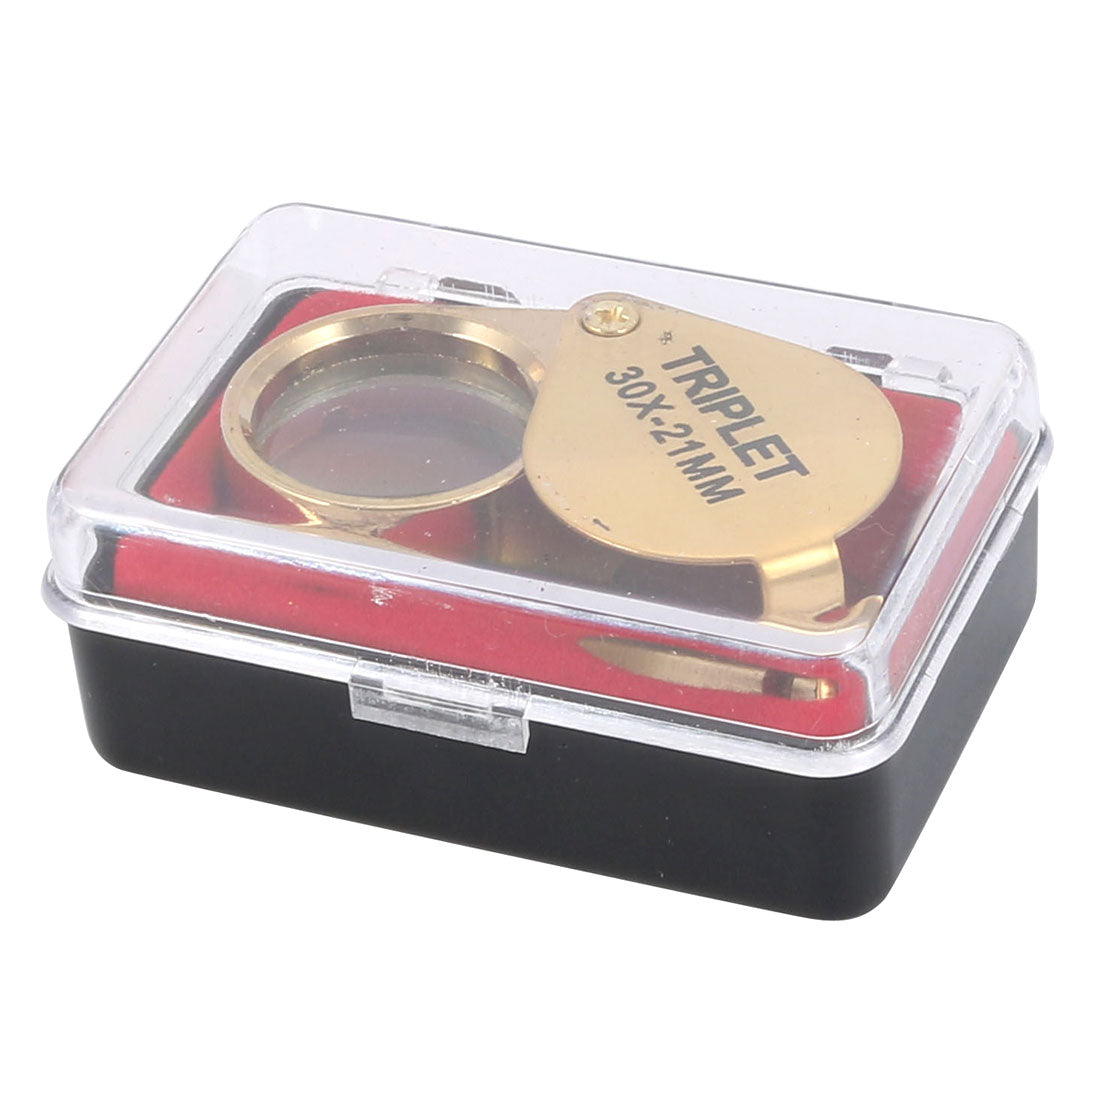 uxcell Uxcell Magnifier Illuminated Magnifier Magnifying Glass 30x Gold Tone